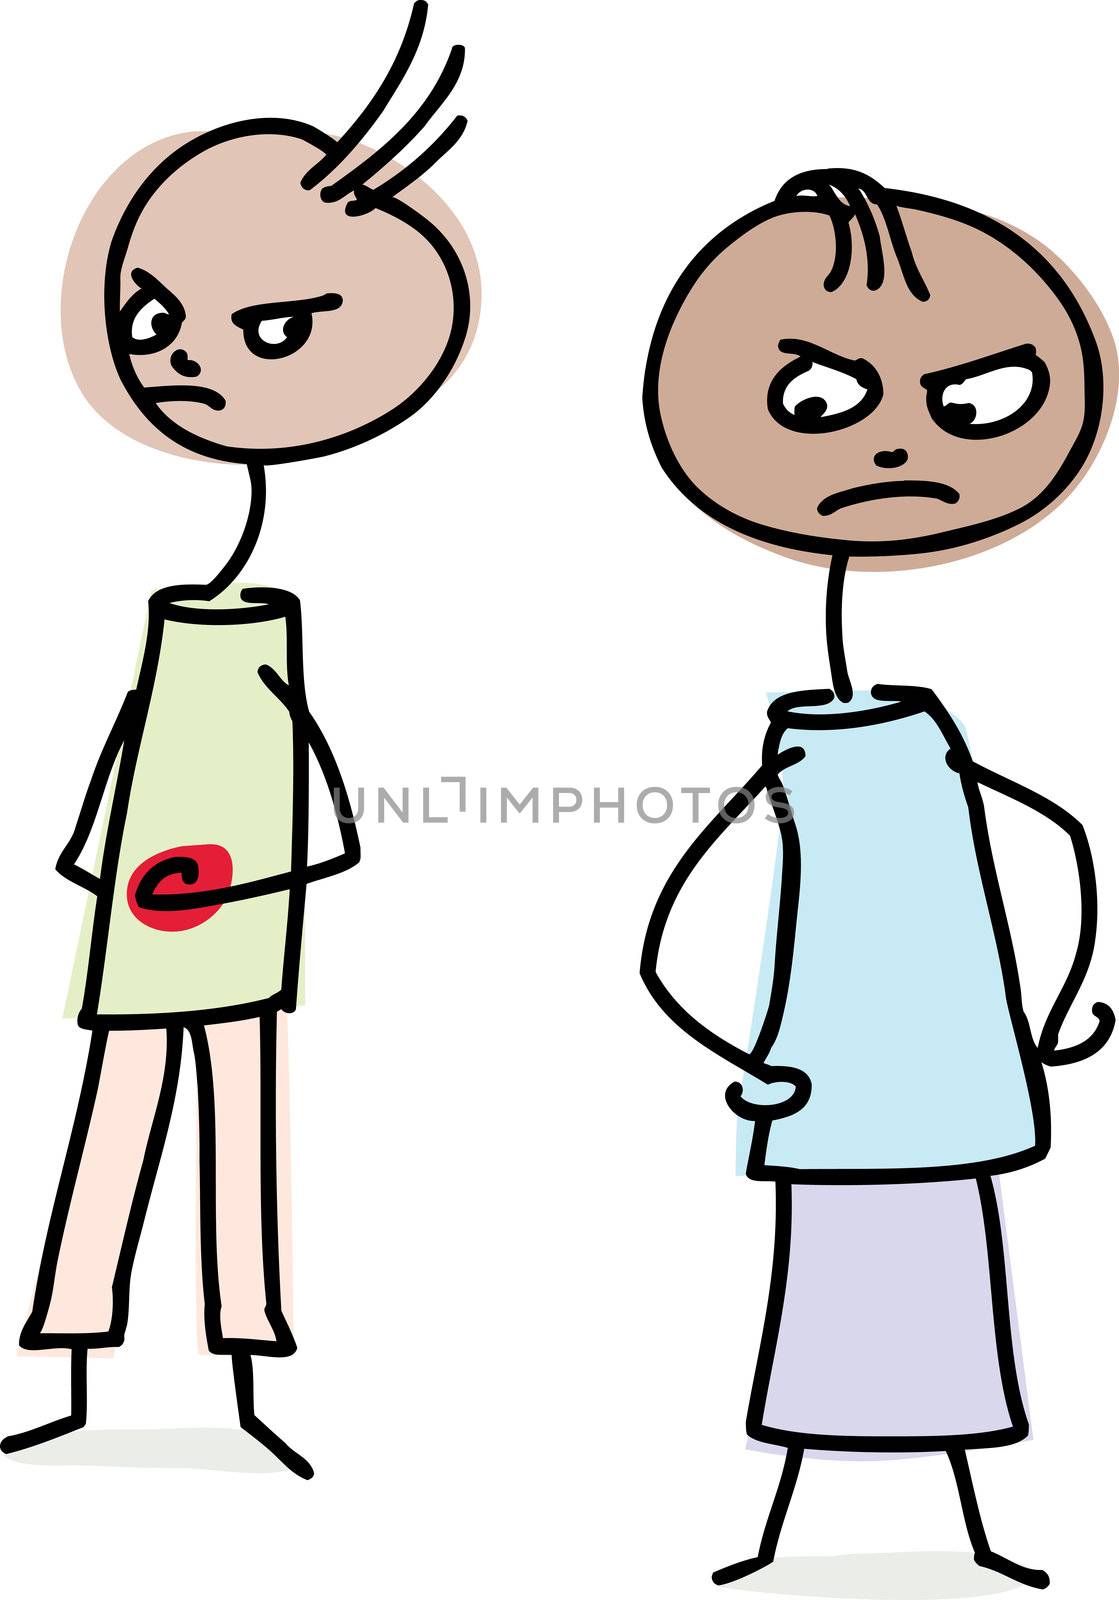 Angry man and woman stick figure over white background